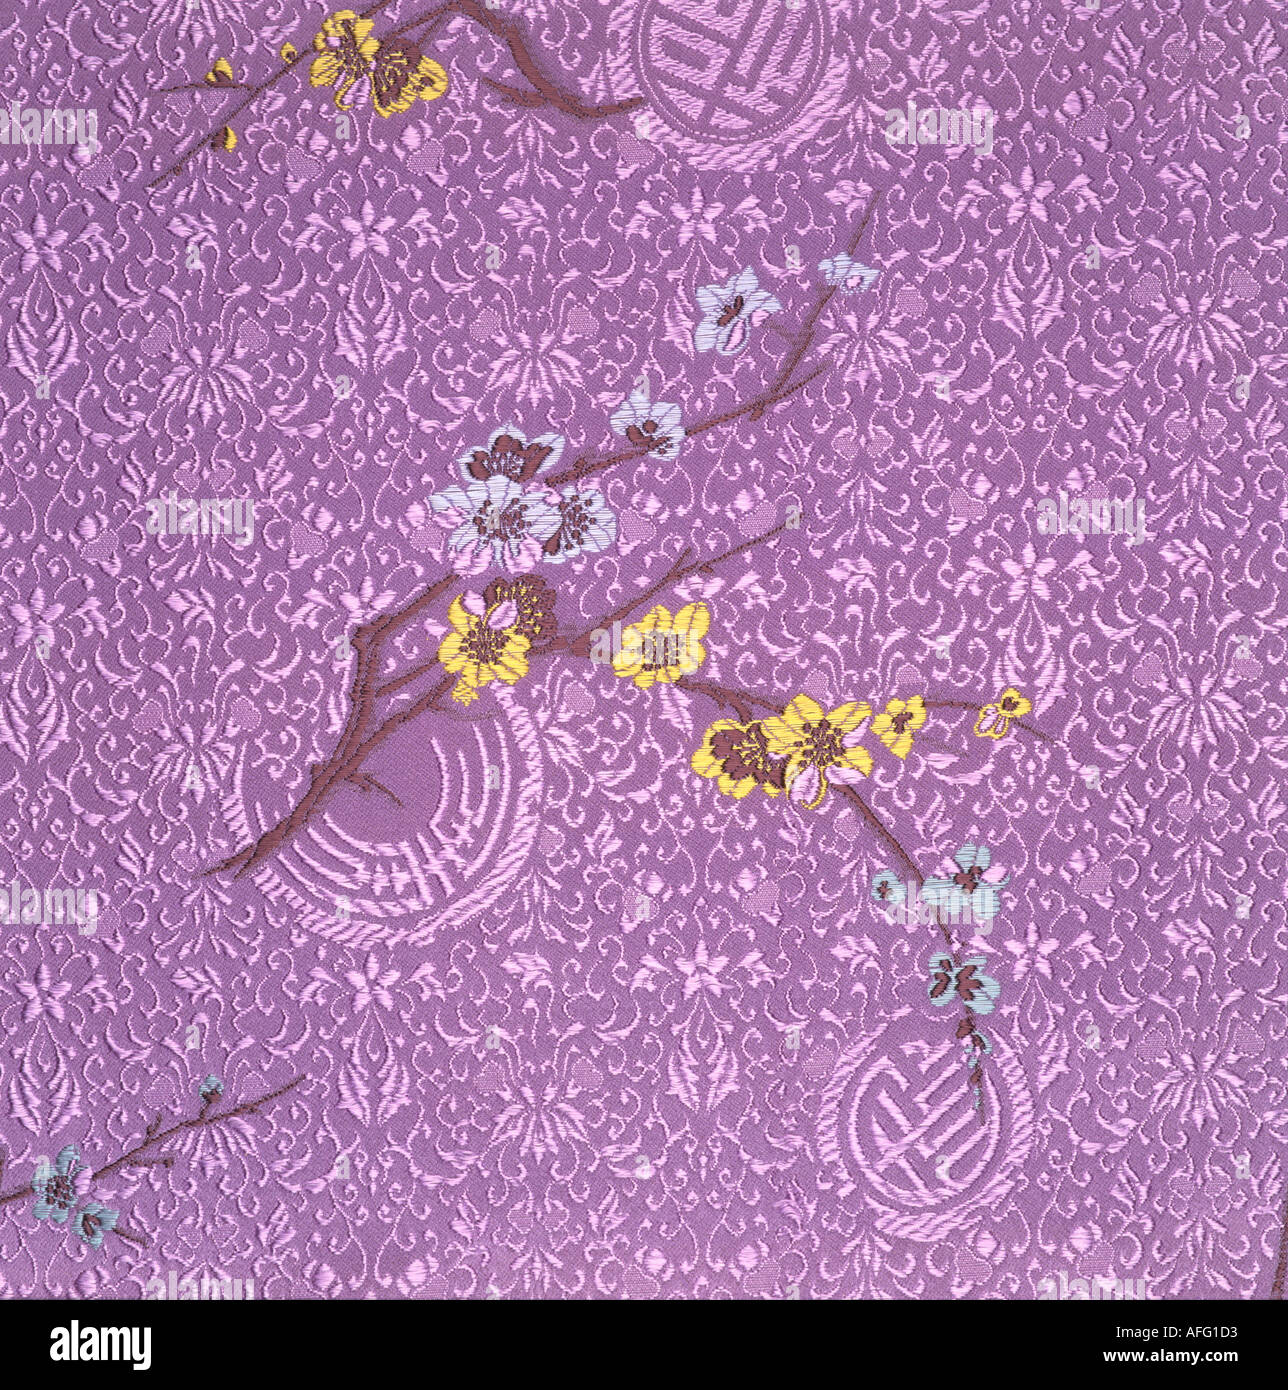 Silk textile with cherry blossom motif Stock Photo